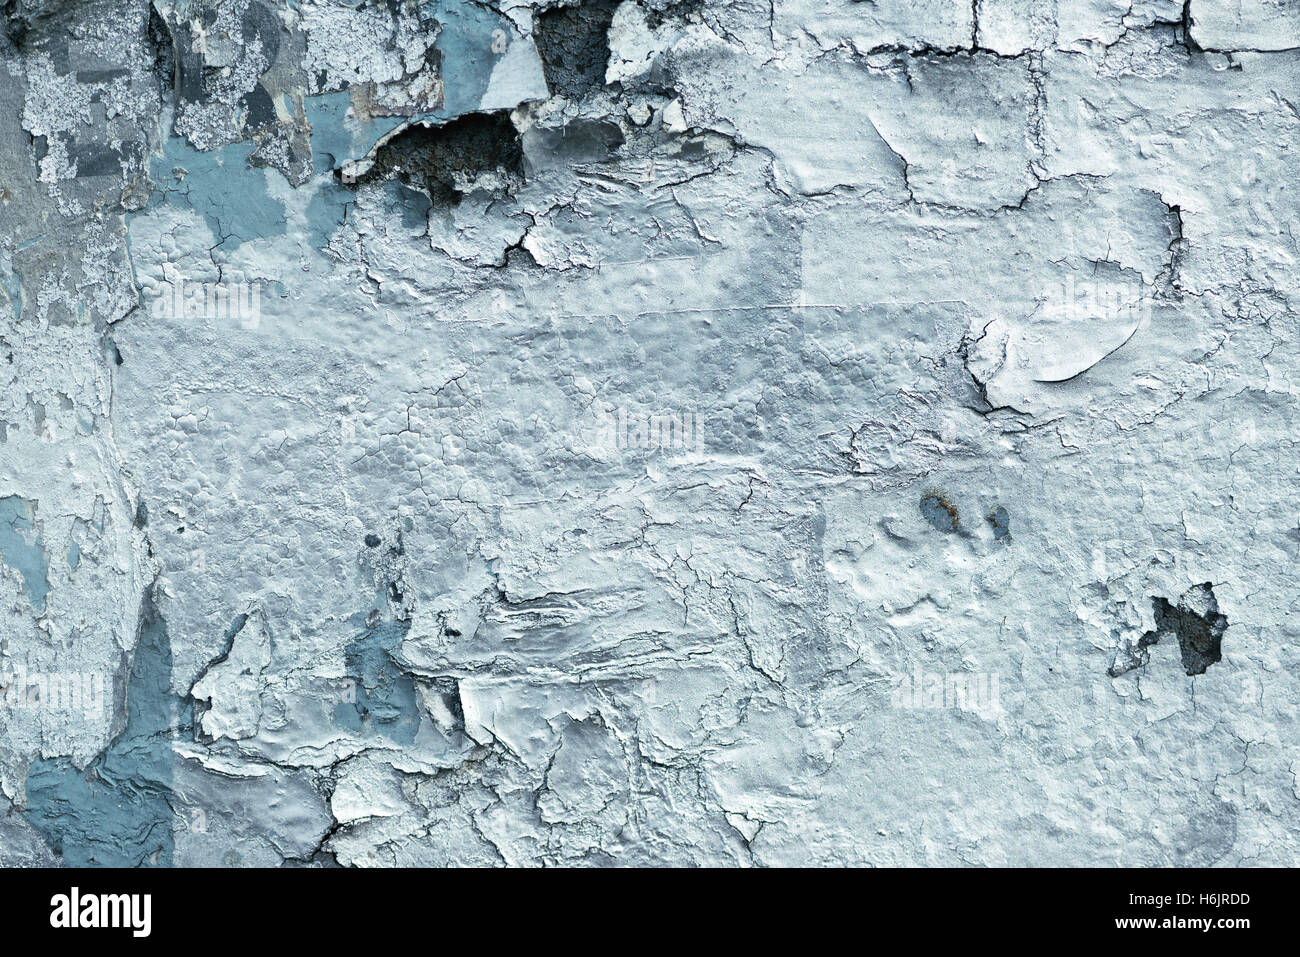 Grunge wall surface with paint peeling off, urban decay texture Stock Photo